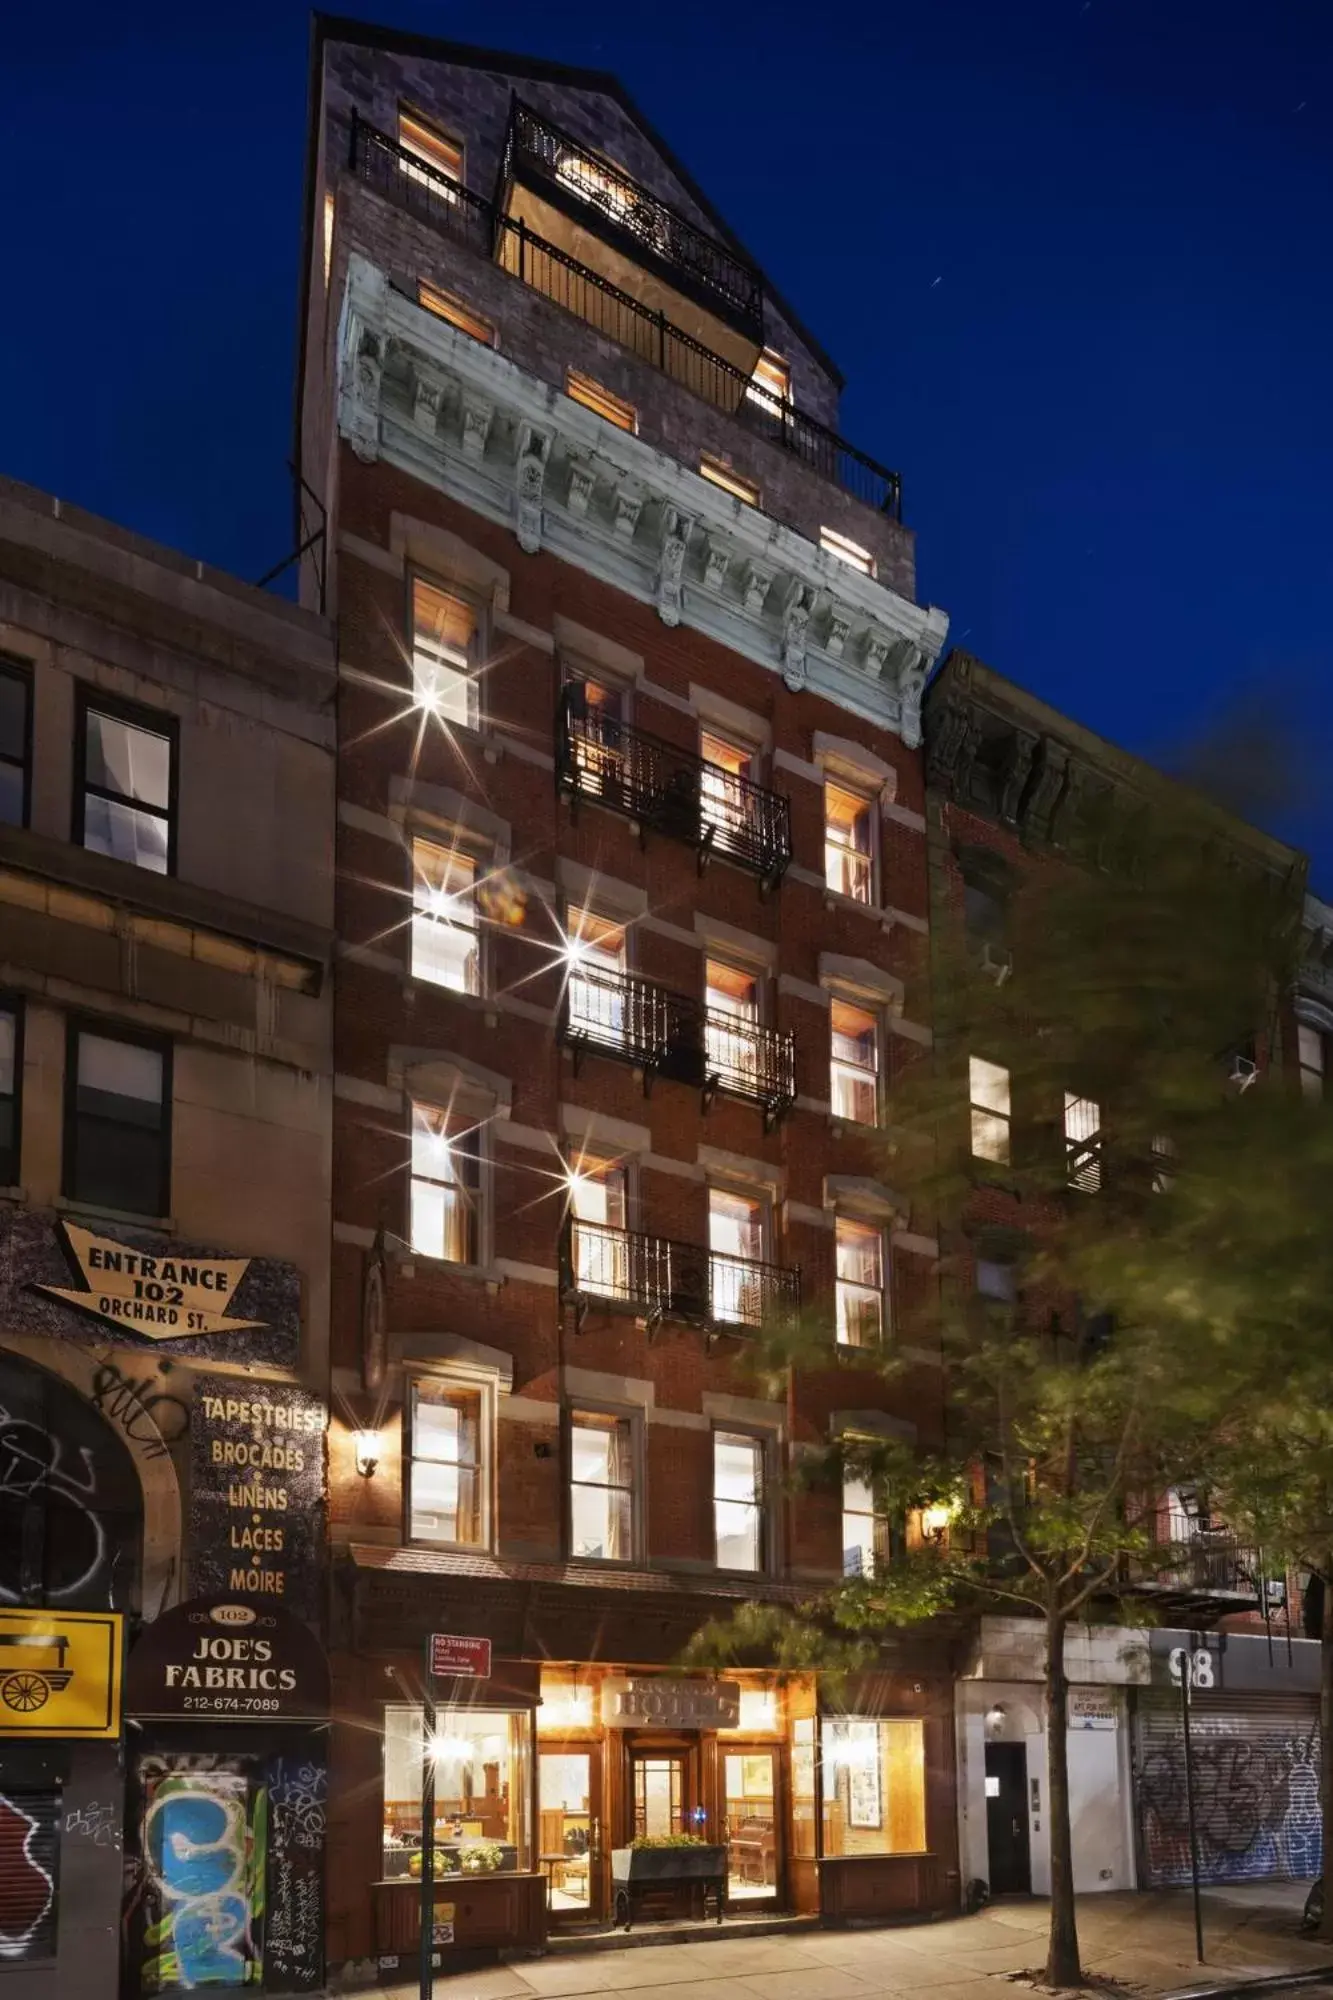 Property Building in The Historic Blue Moon Hotel - NYC